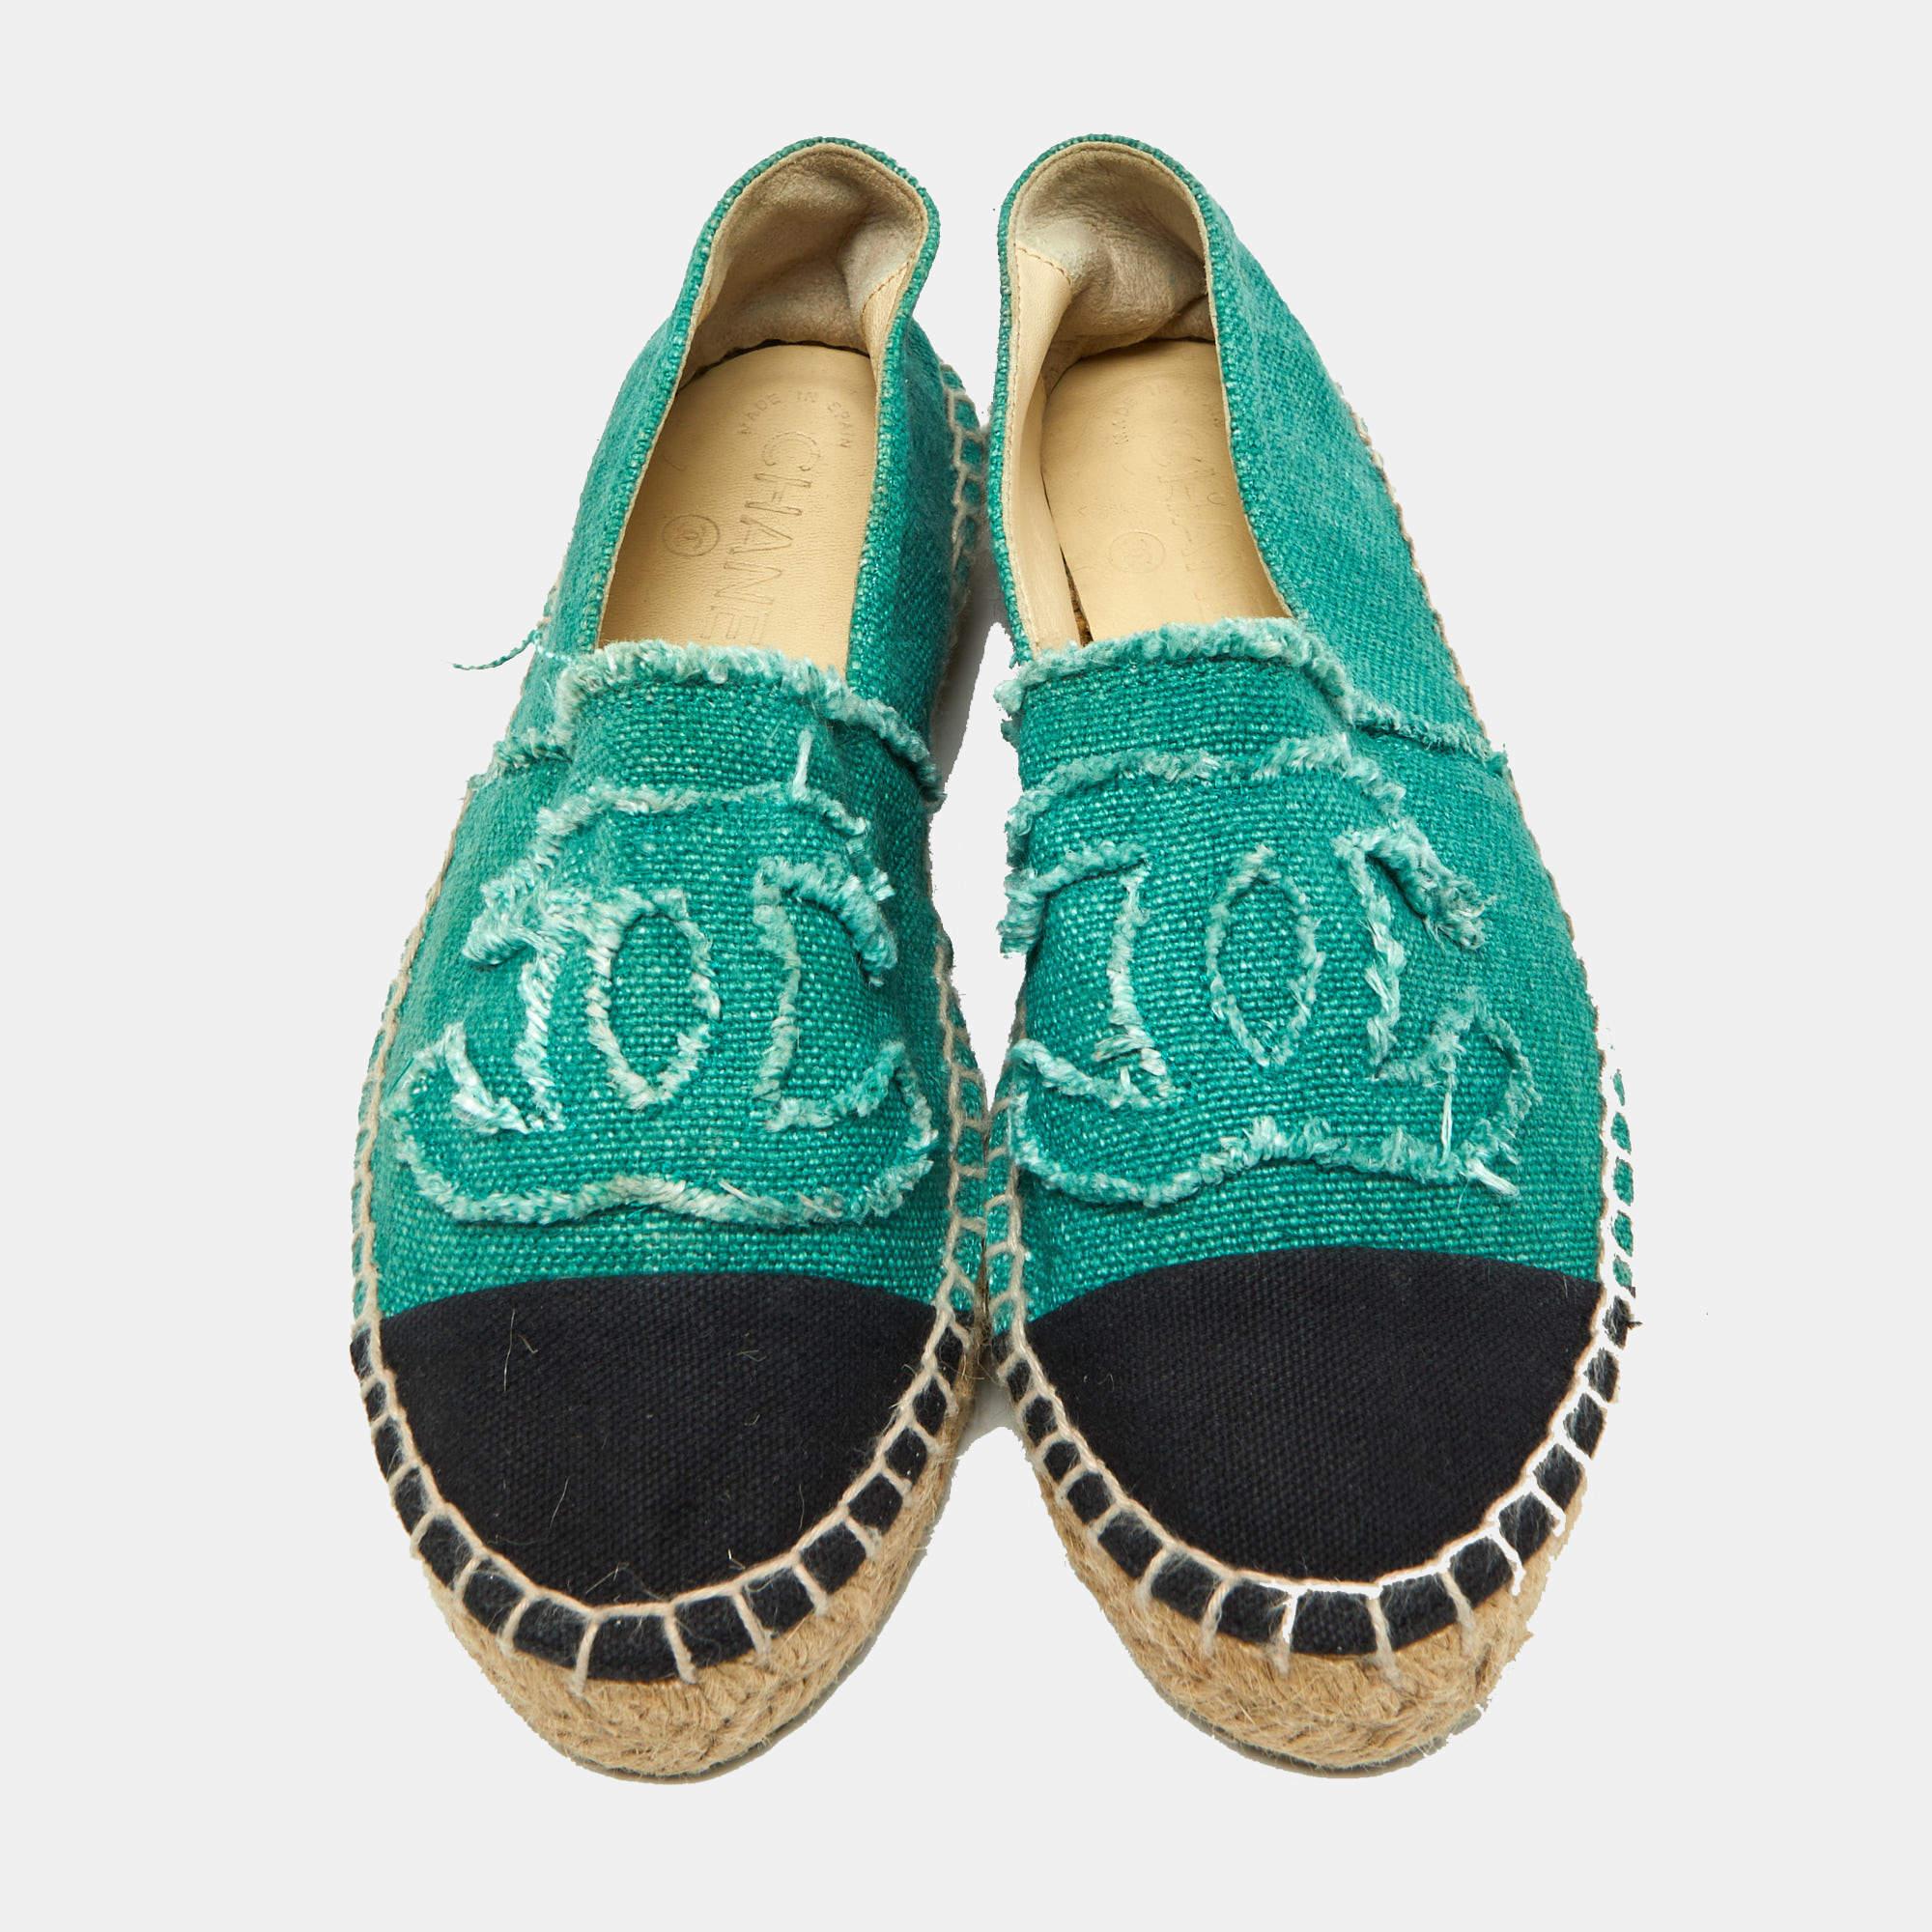 To perfectly complement your attires, Chanel brings you this pair of espadrilles that speak nothing but style. They have been crafted from green & black canvas and styled with cap toes and the iconic CC logo detailing on the vamps. They are endowed